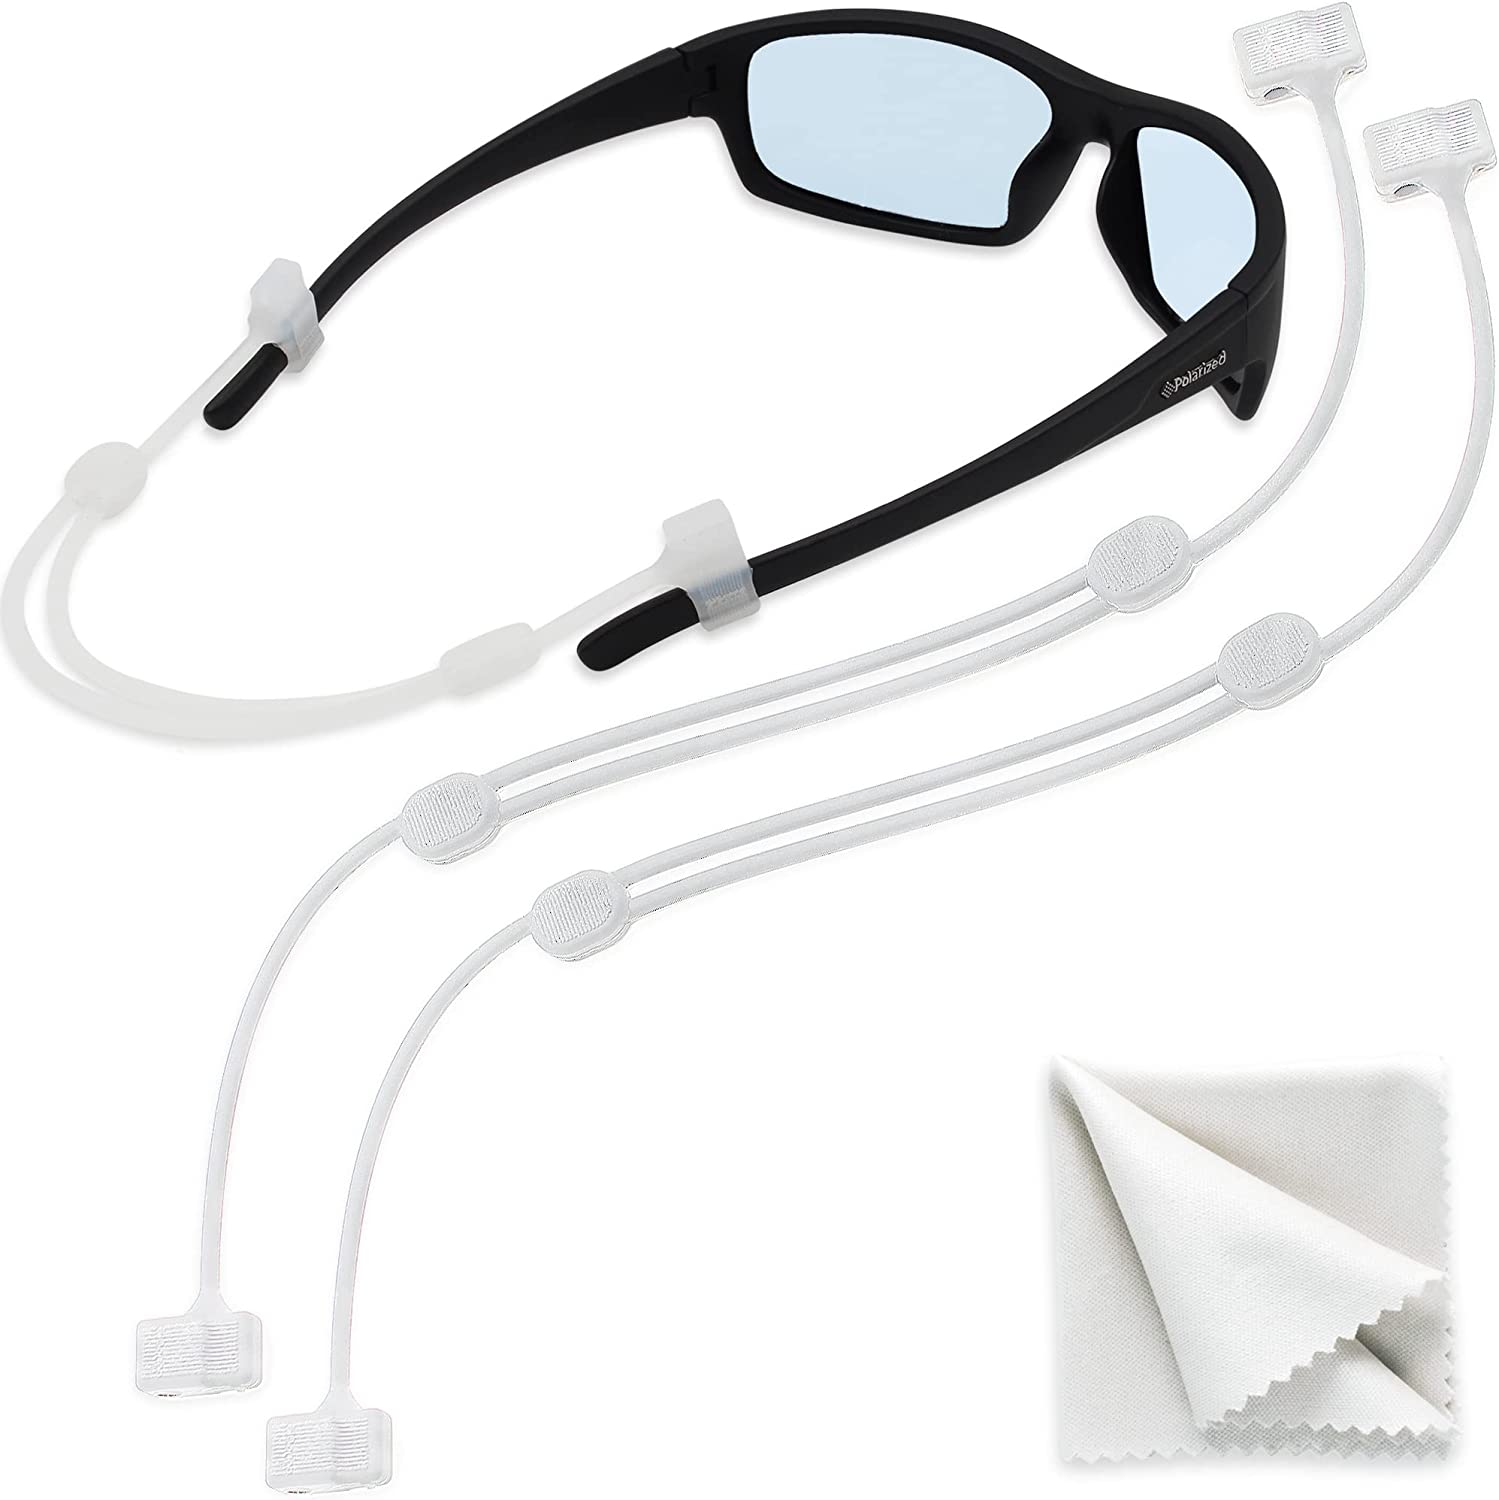 Silicone Eyeglass Holder with New Mount Technology